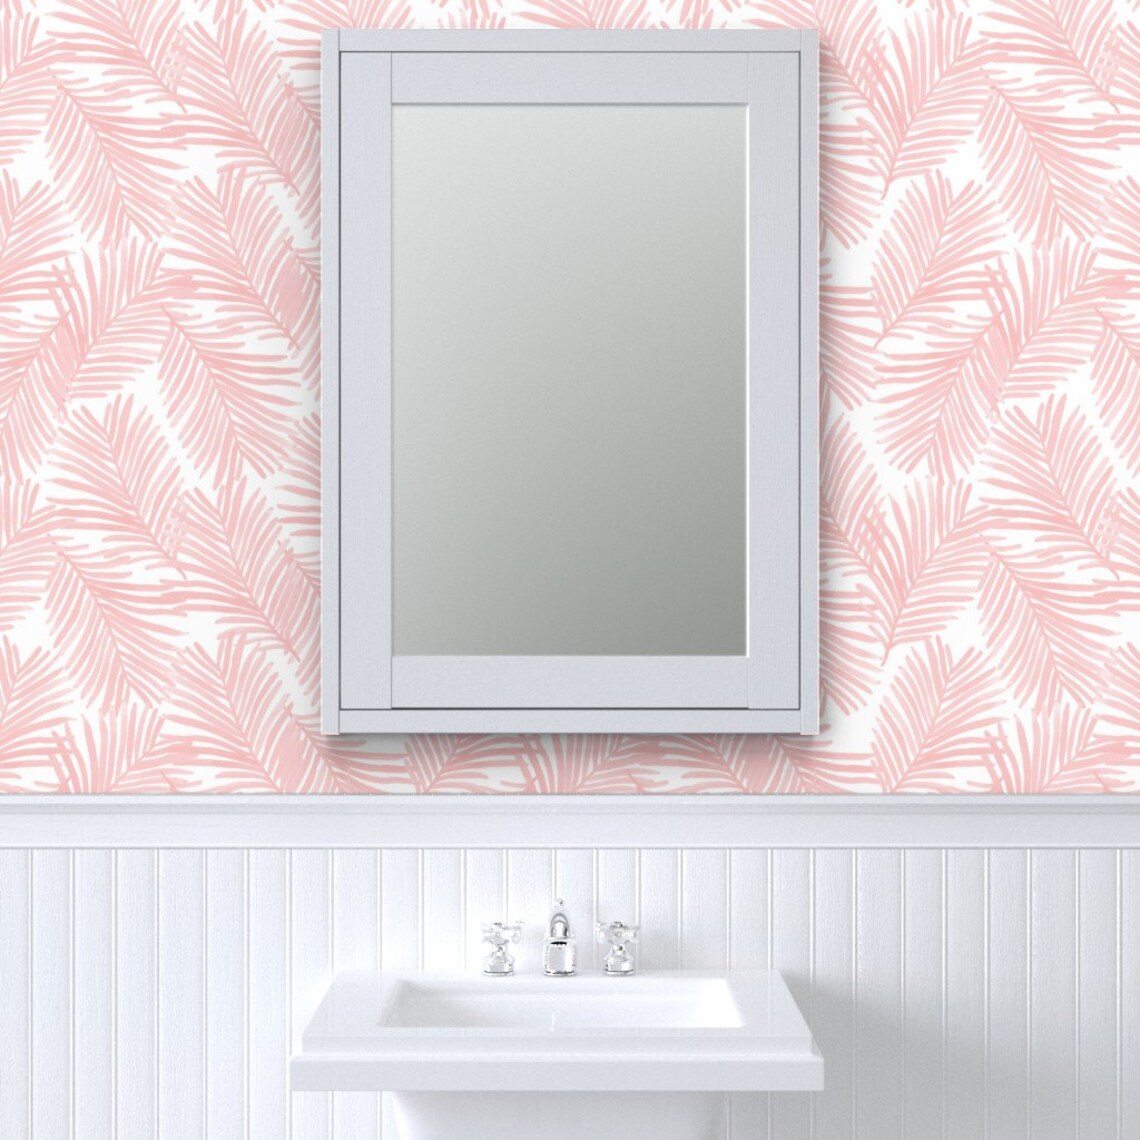 Palm Wallpaper Palm Print Fabric Pastel Pink By | Etsy